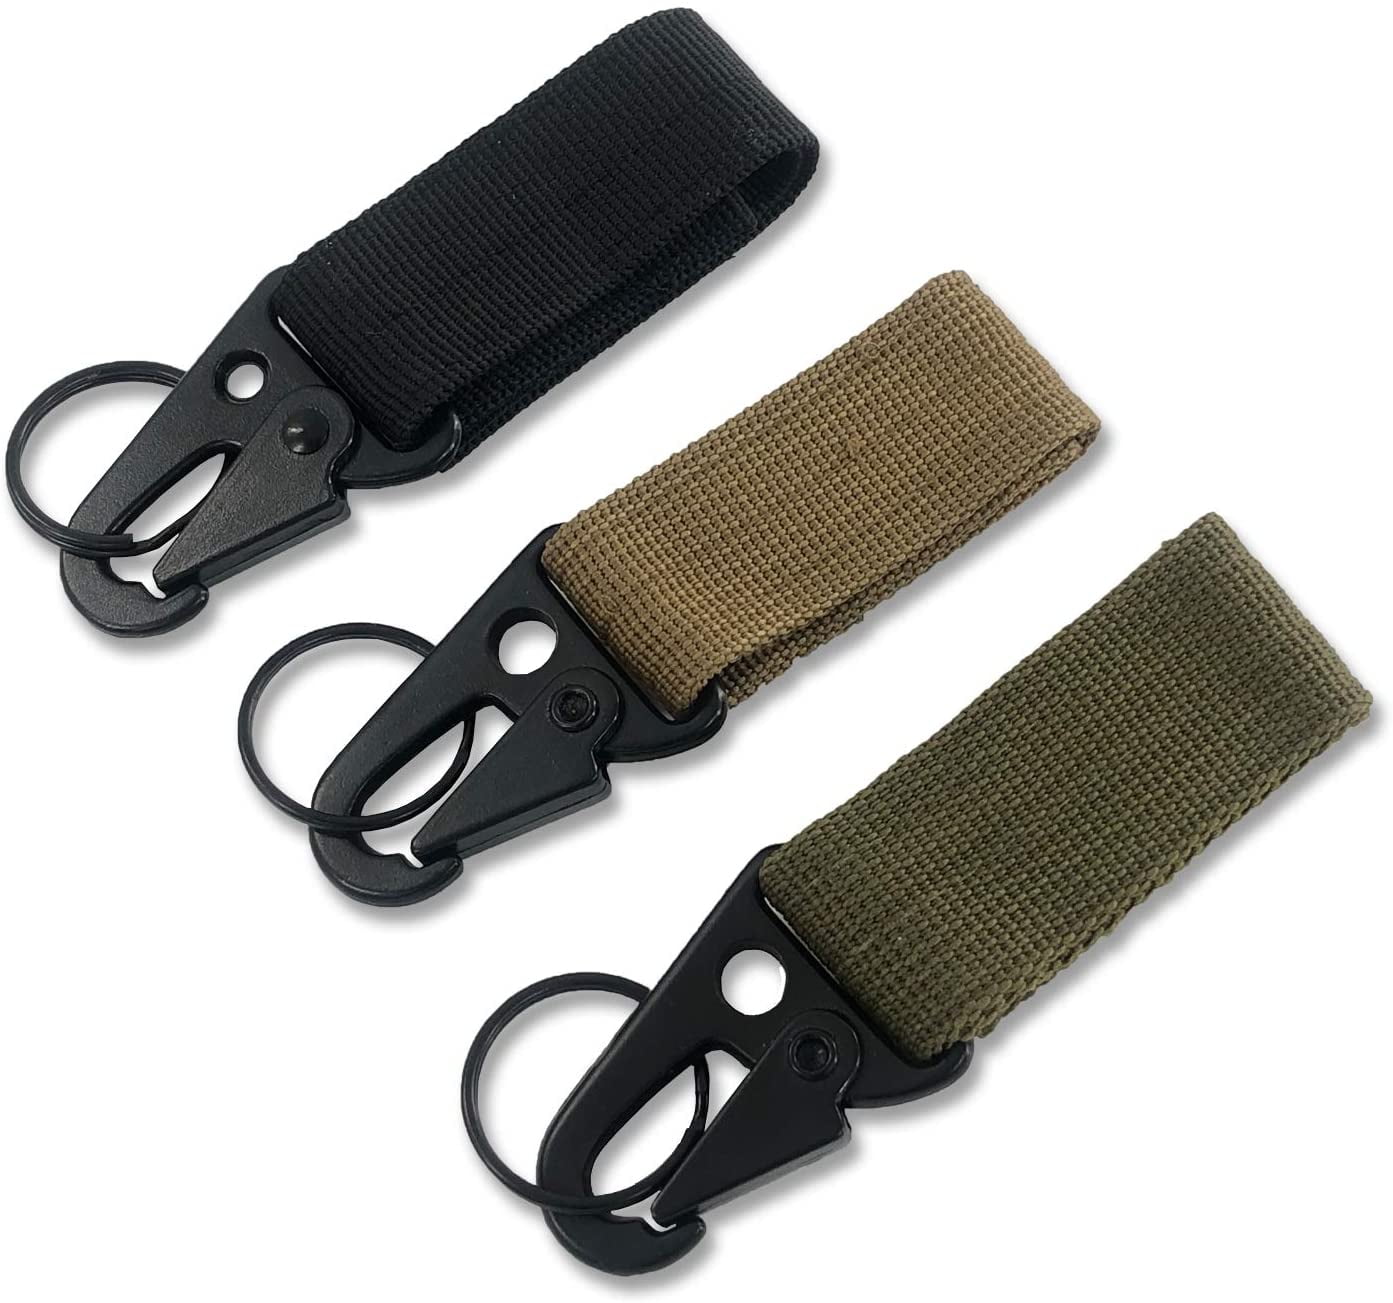 Utility Series Utility Tactical Carabiner with Paracord, Black and Tan 